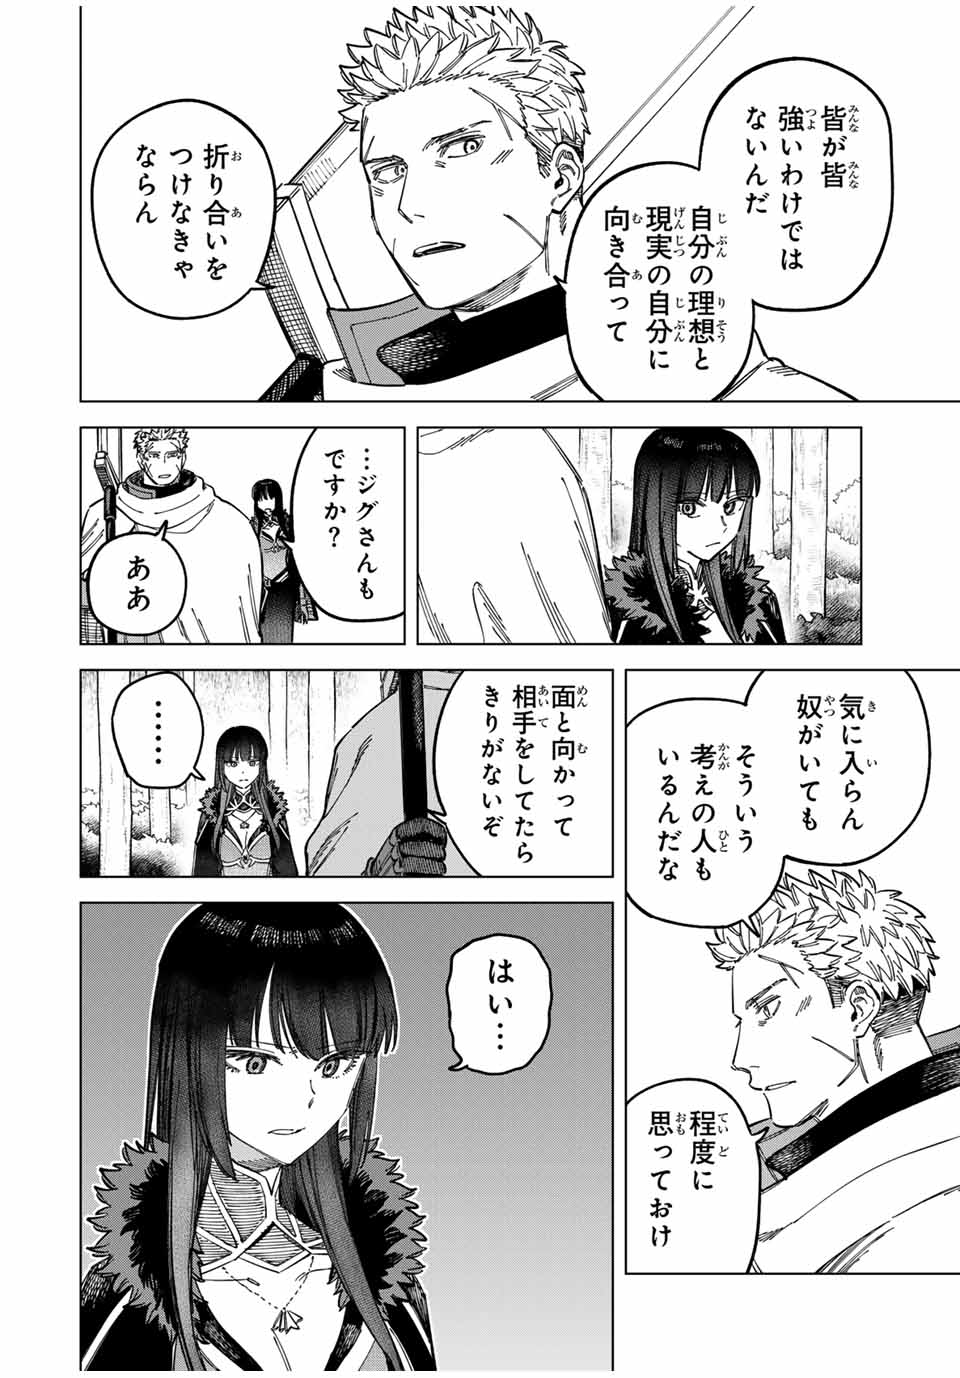 Witch and Mercenary 魔女と傭兵 第9.1話 - Page 8